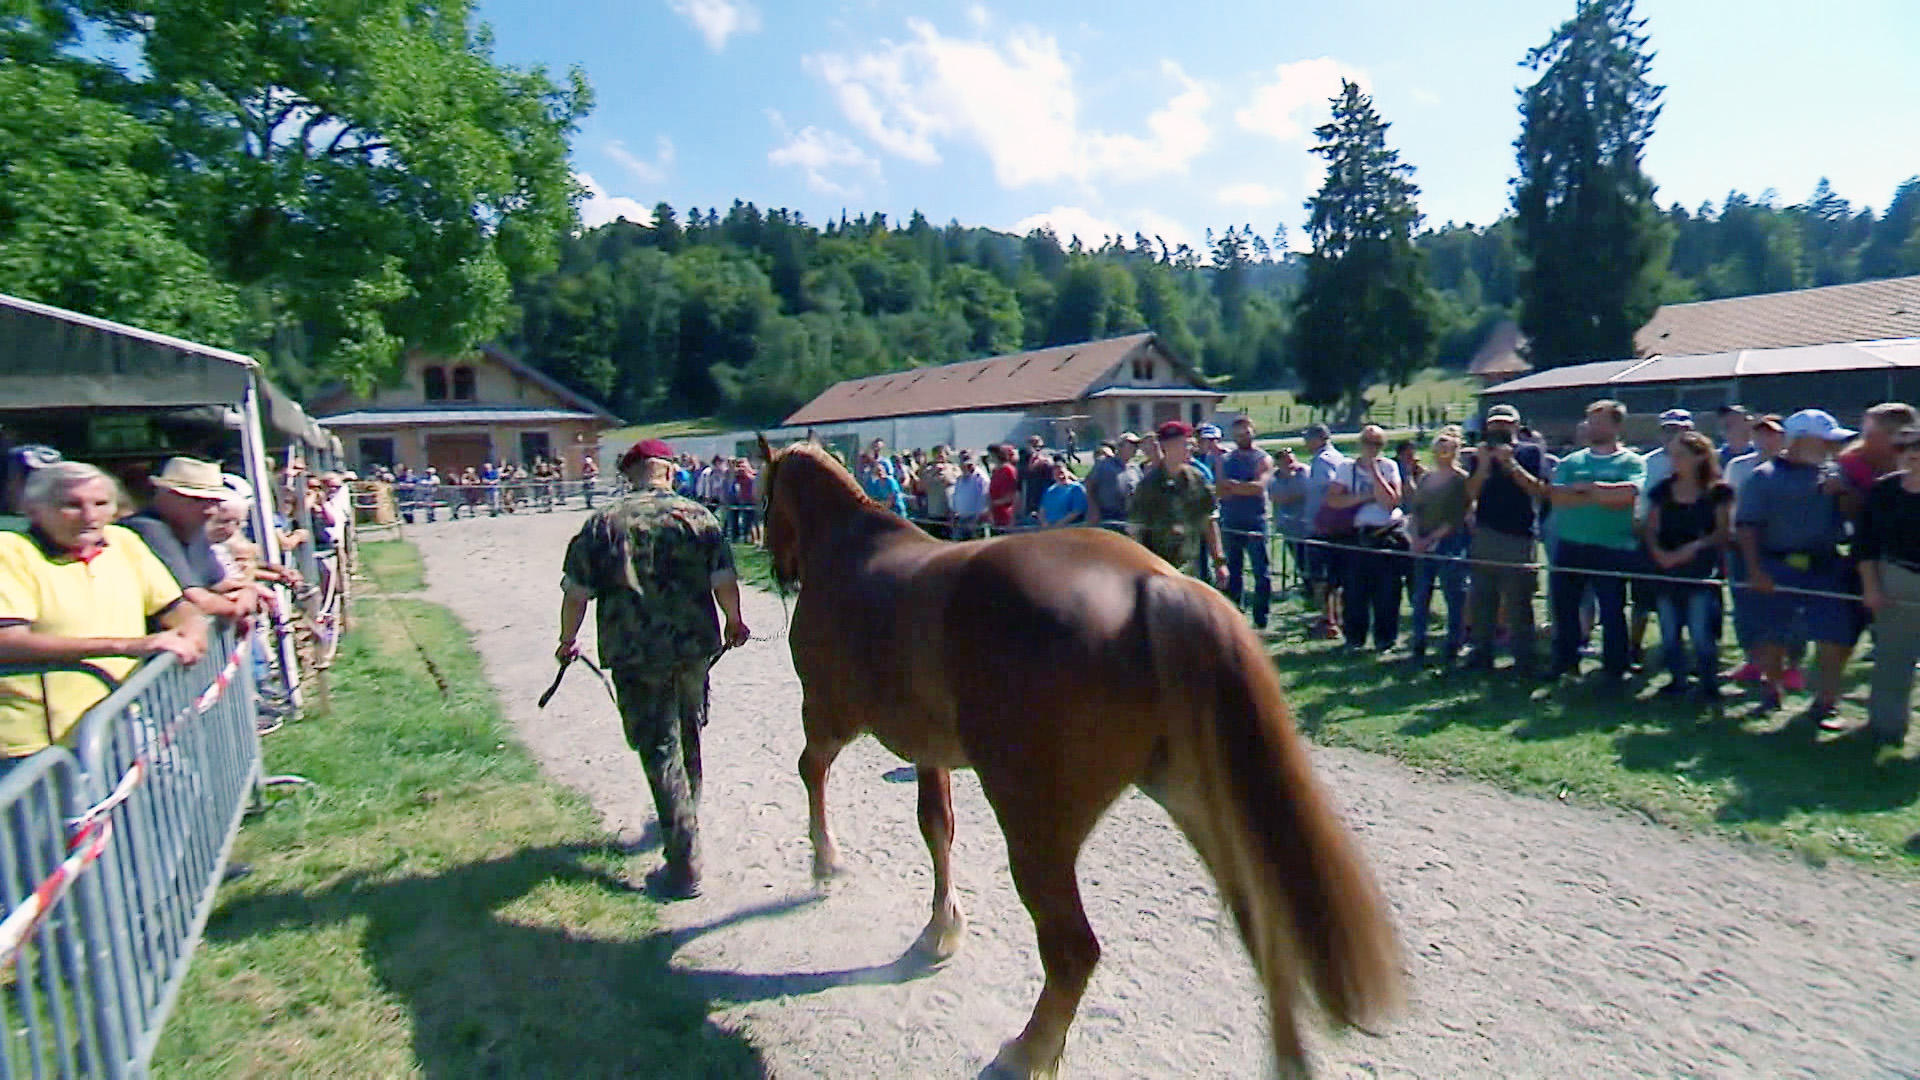 A horse is led down a track by a man in army uniform as people watch on